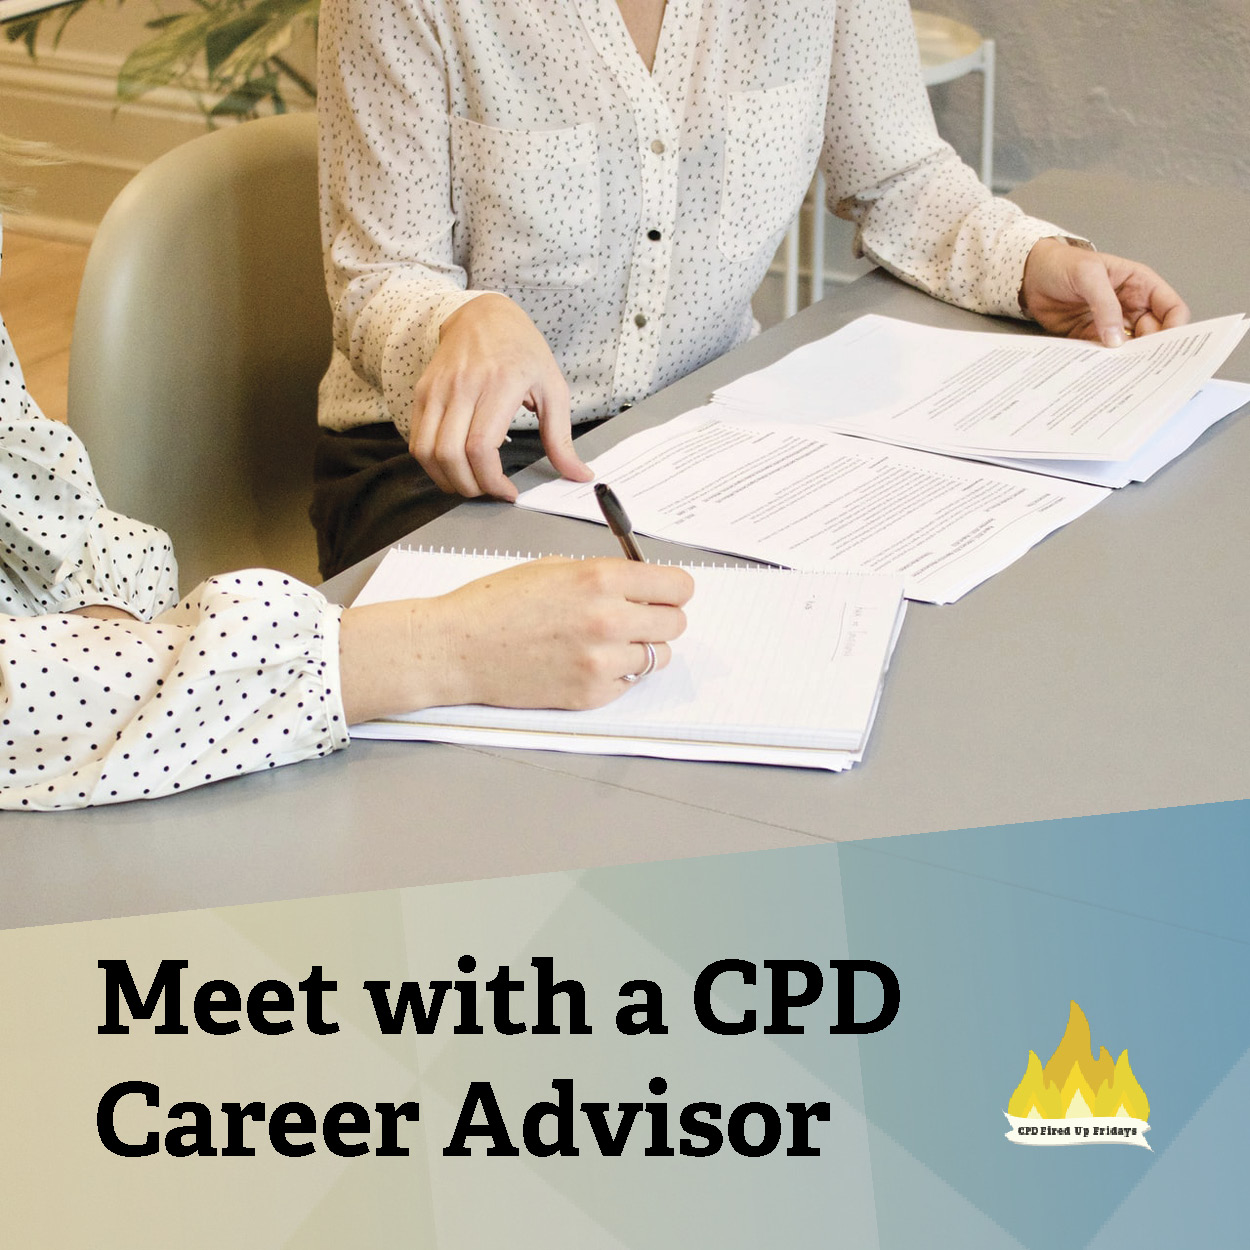 Seen from the shoulders down, two people sit at a beige colored table with papers spread out in front of them. The person closest the camera writes on one of the pages, while the person beside them prepares to turn one of the pages over. Underneath the image, text reads: 'Meet with a CPD Career Advisor.'